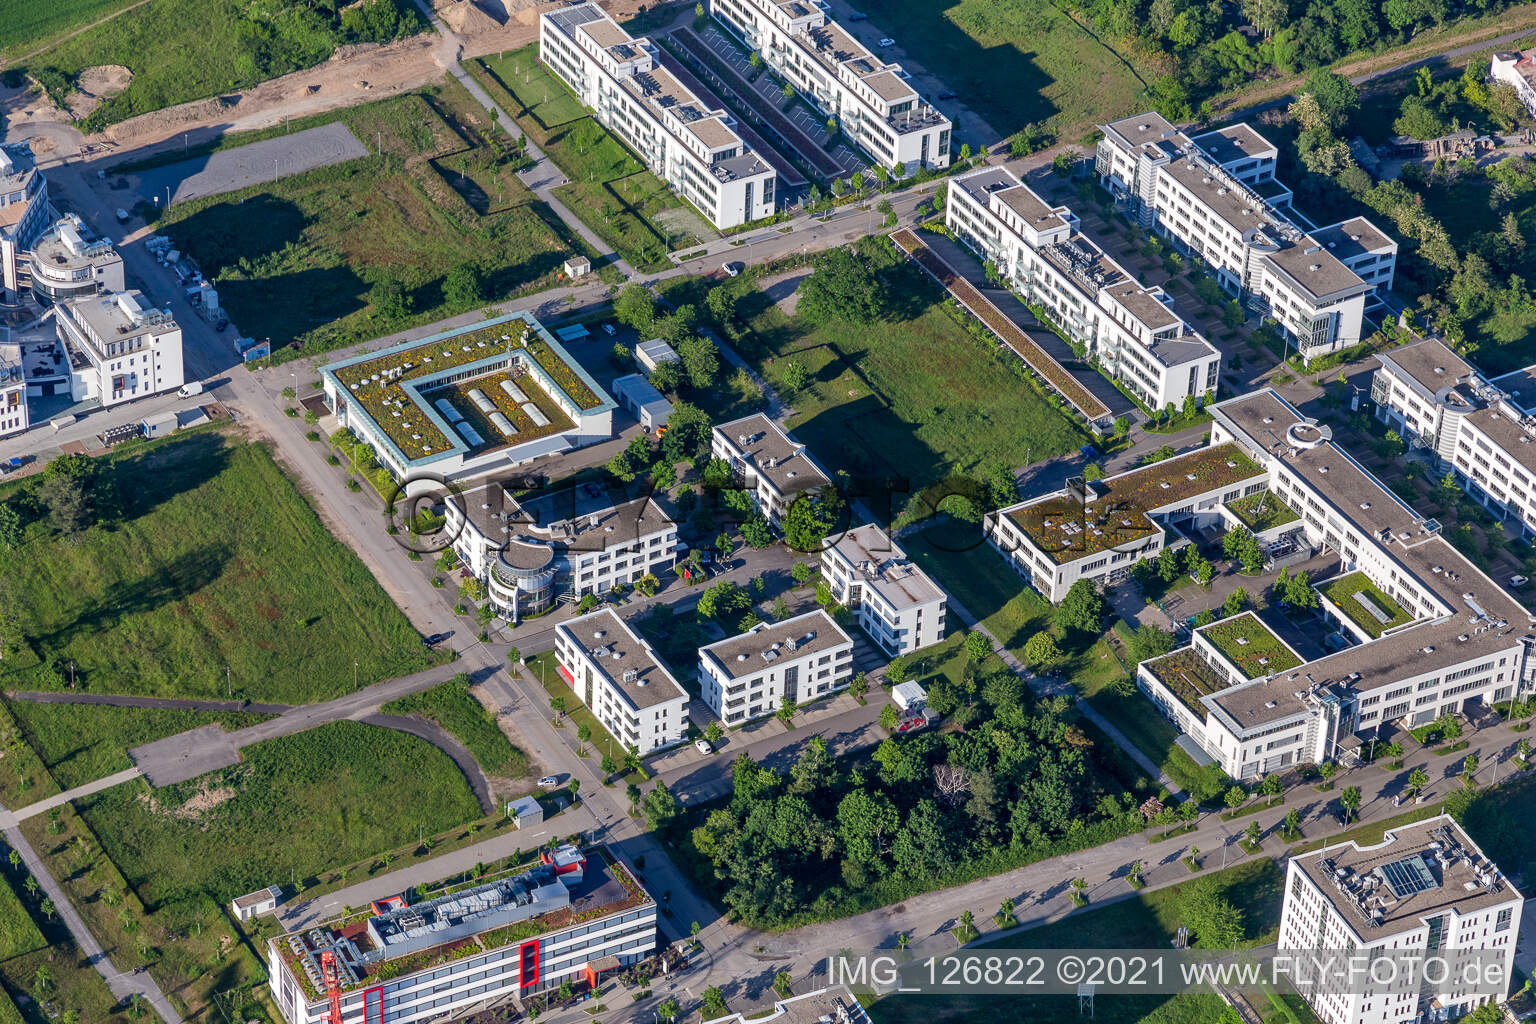 Technology Park in the district Rintheim in Karlsruhe in the state Baden-Wuerttemberg, Germany seen from a drone